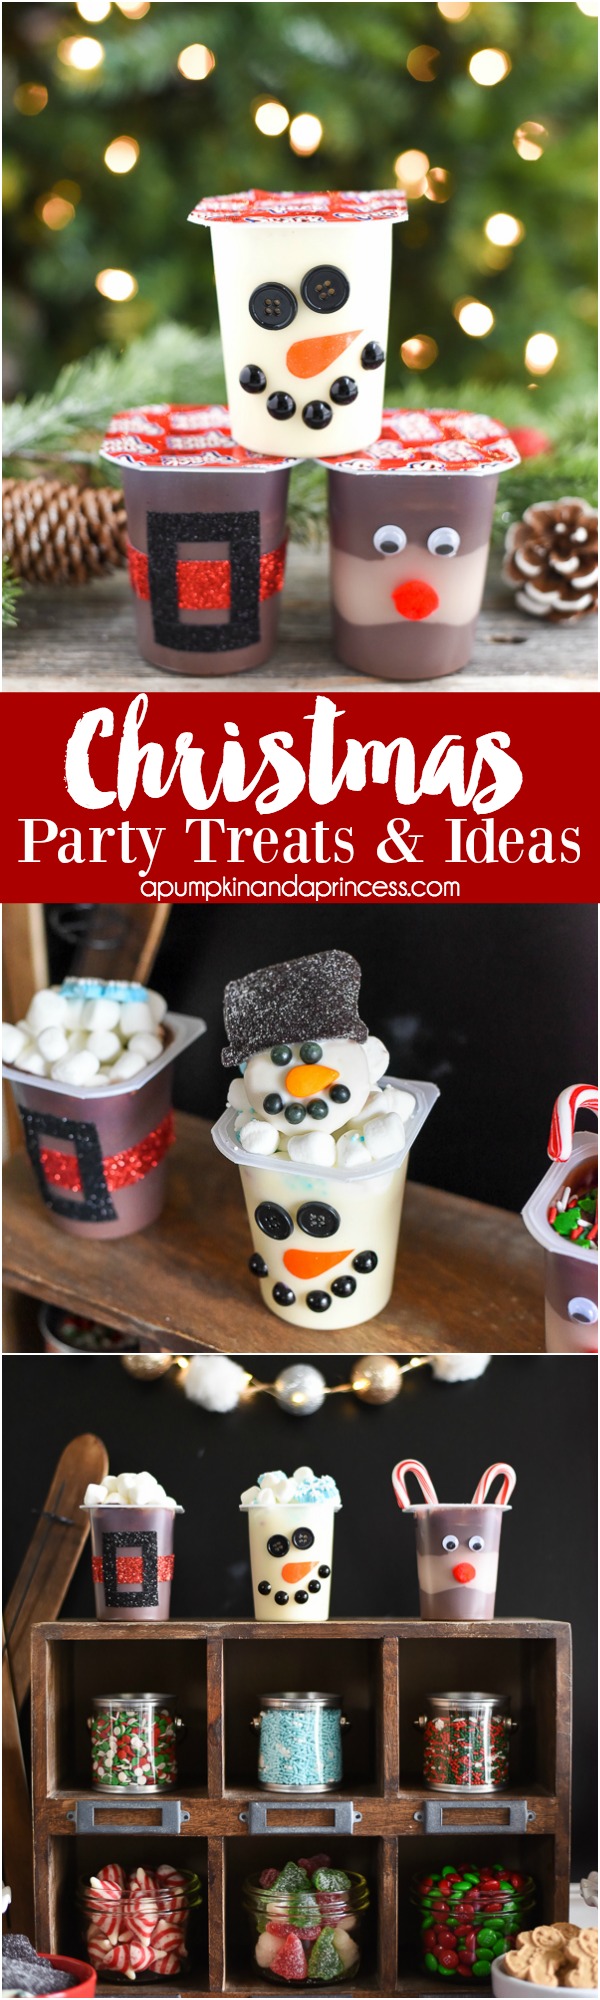 Christmas Party Ideas for Kids